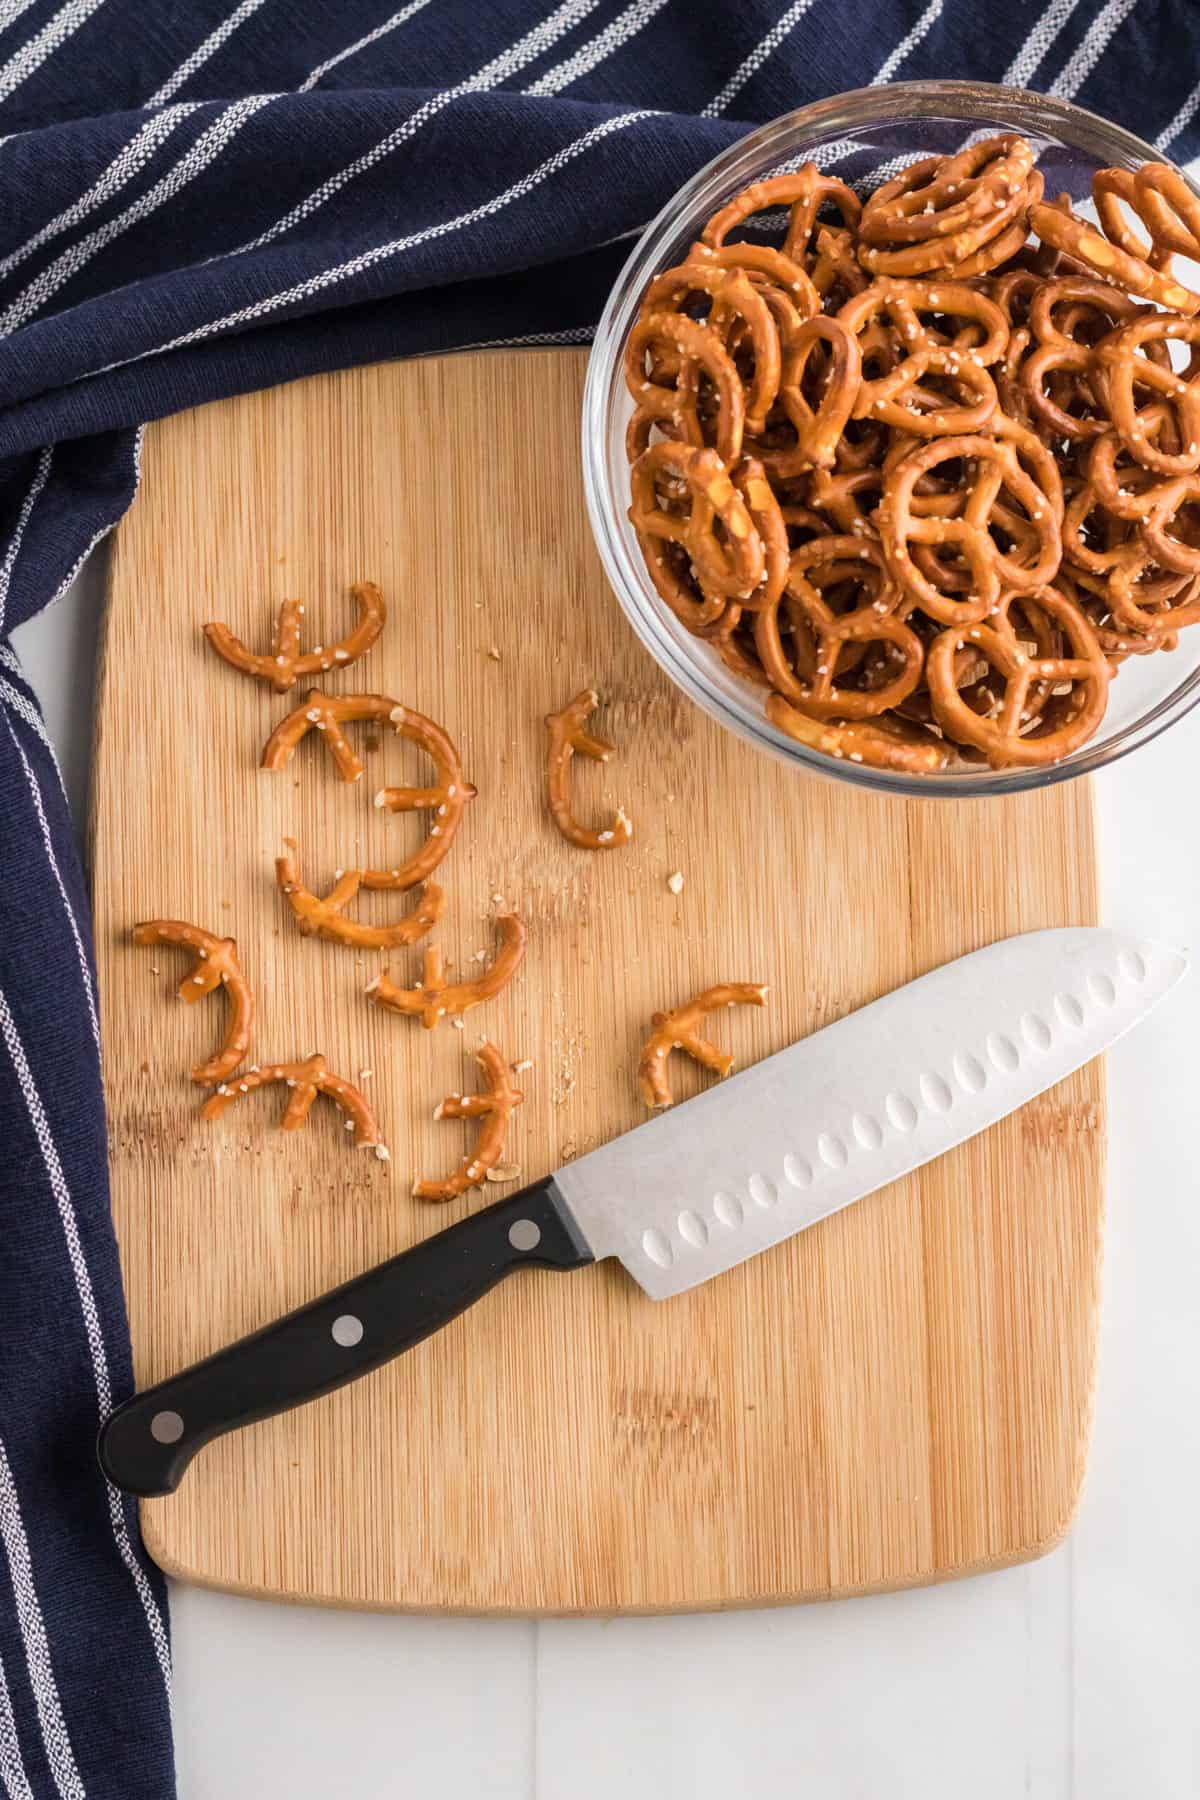 Cut the Pretzels in half to make Antler like pieces.